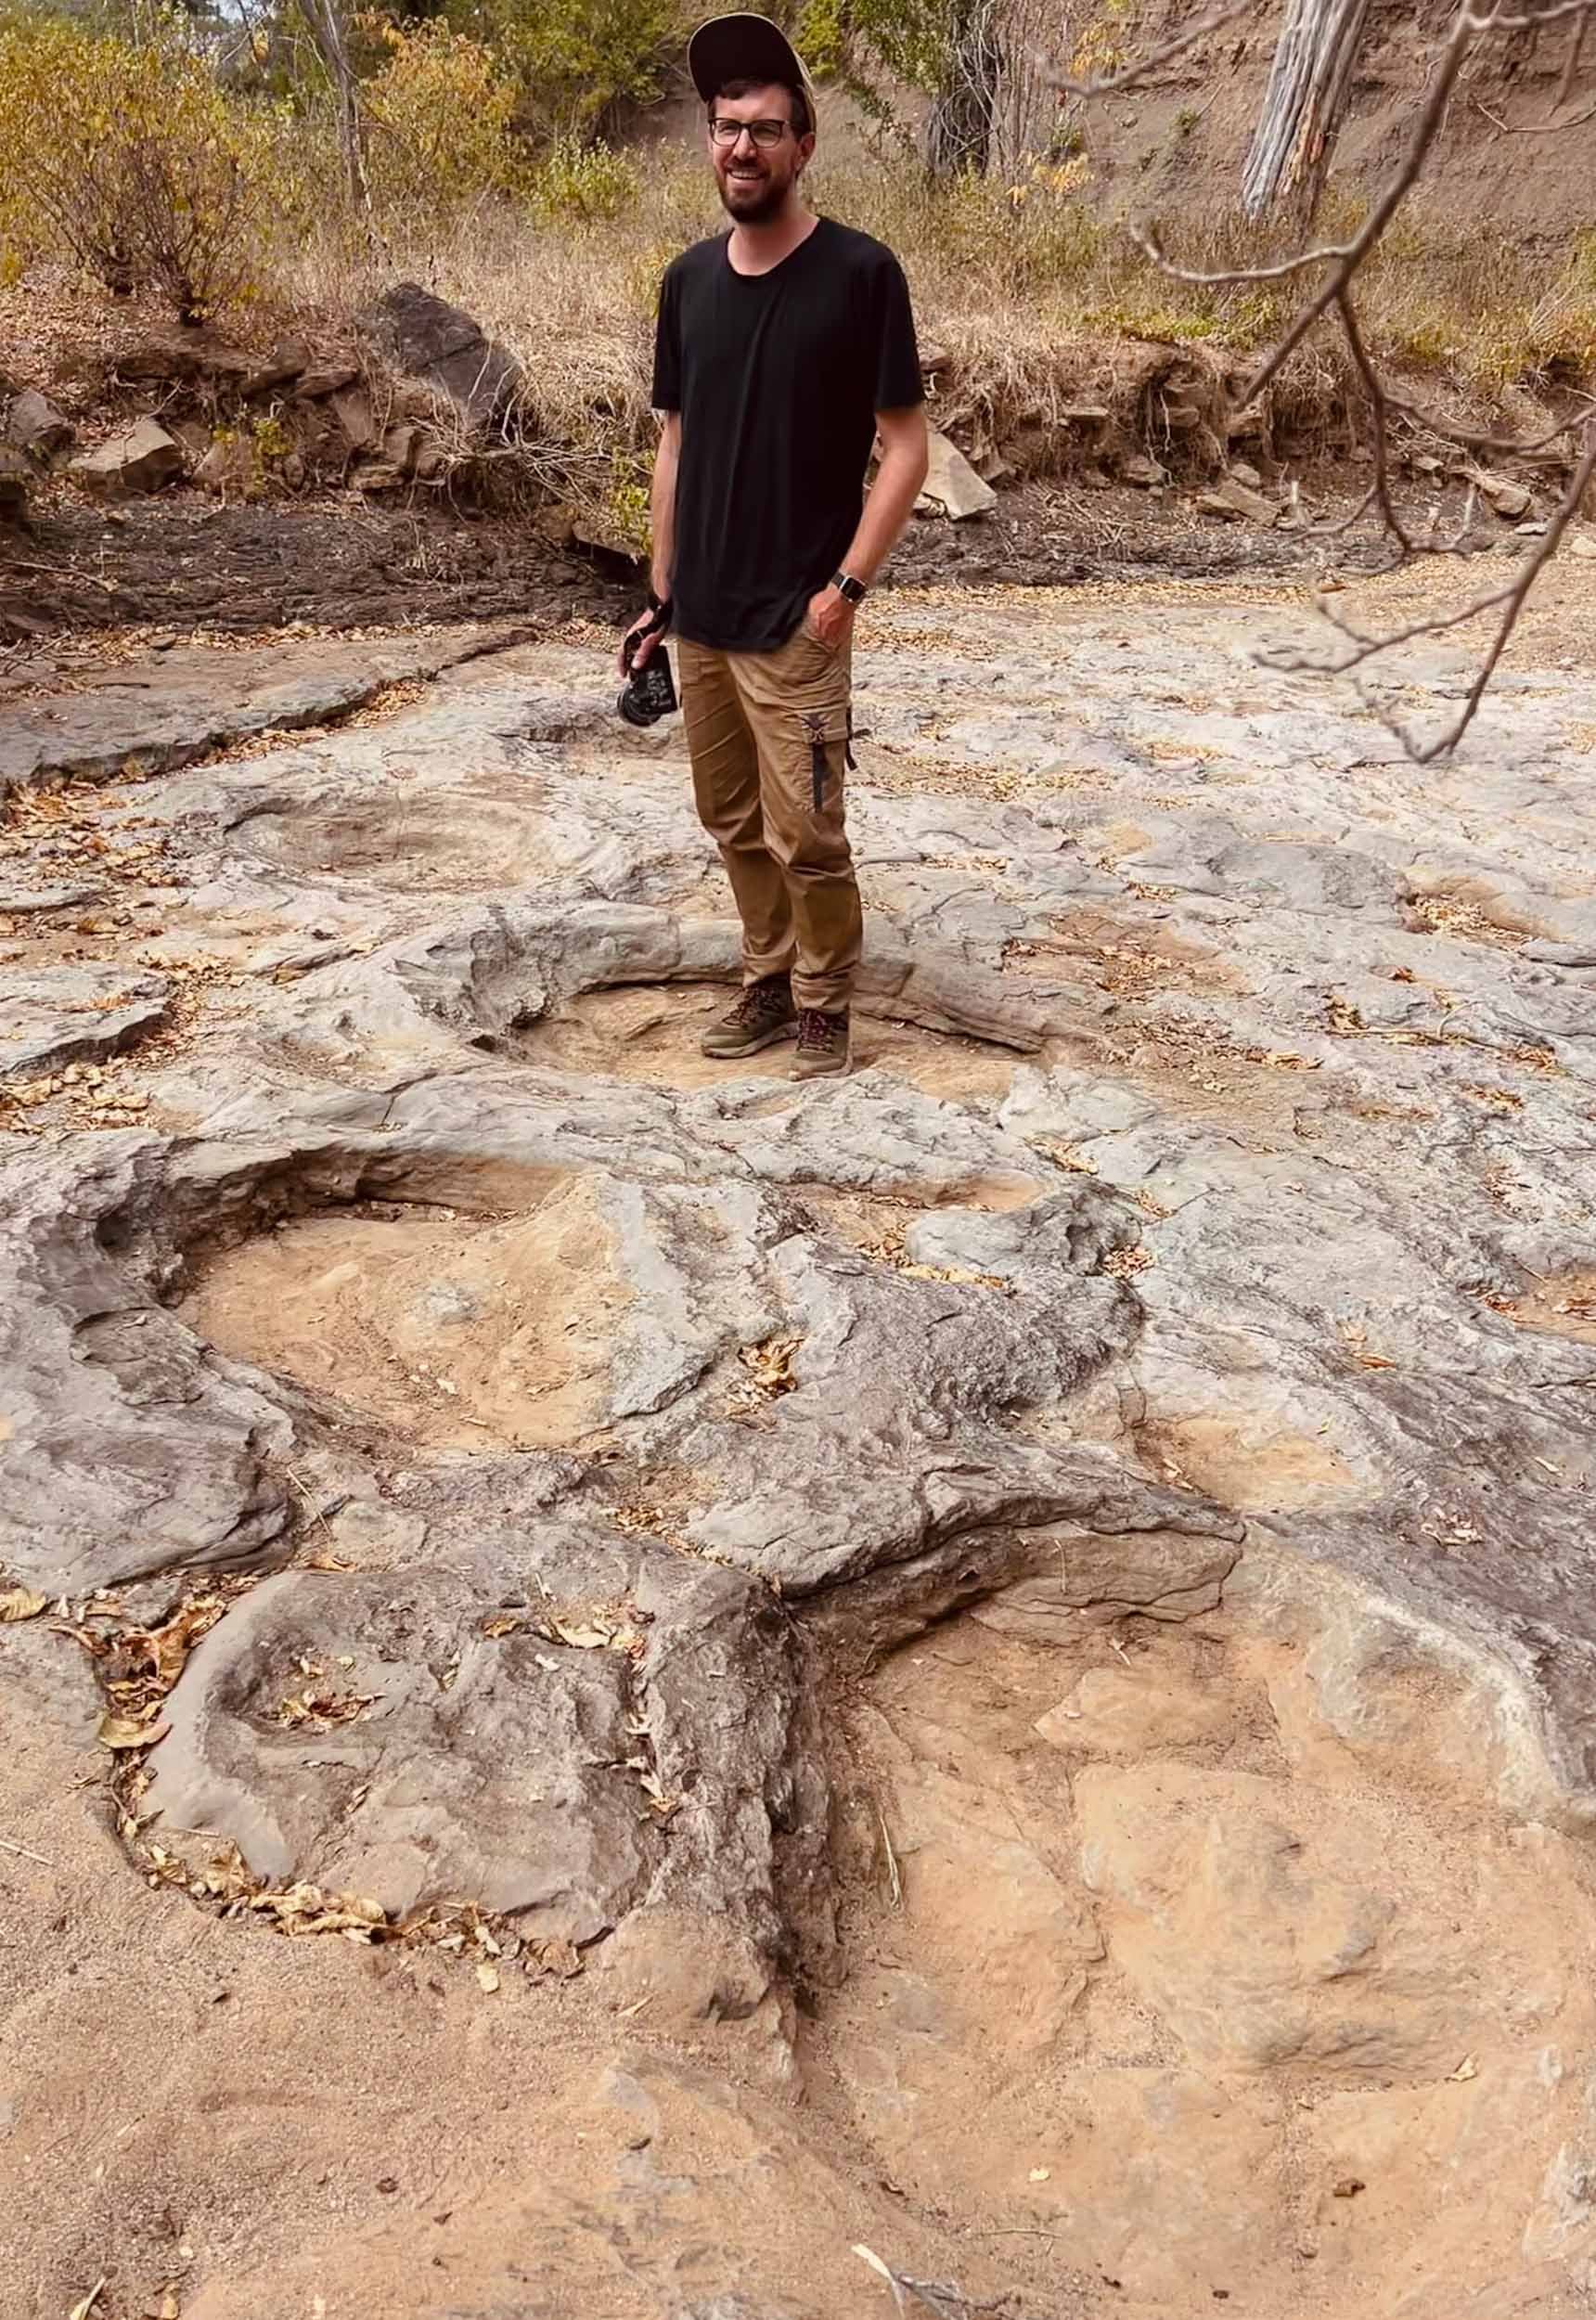  I couldn't resist standing in the footprints of these giants - they were up to 15m tall. If you look closely, the bottom right print shows a crescent shape on top of the actual round foot - a sign of the front legs. 